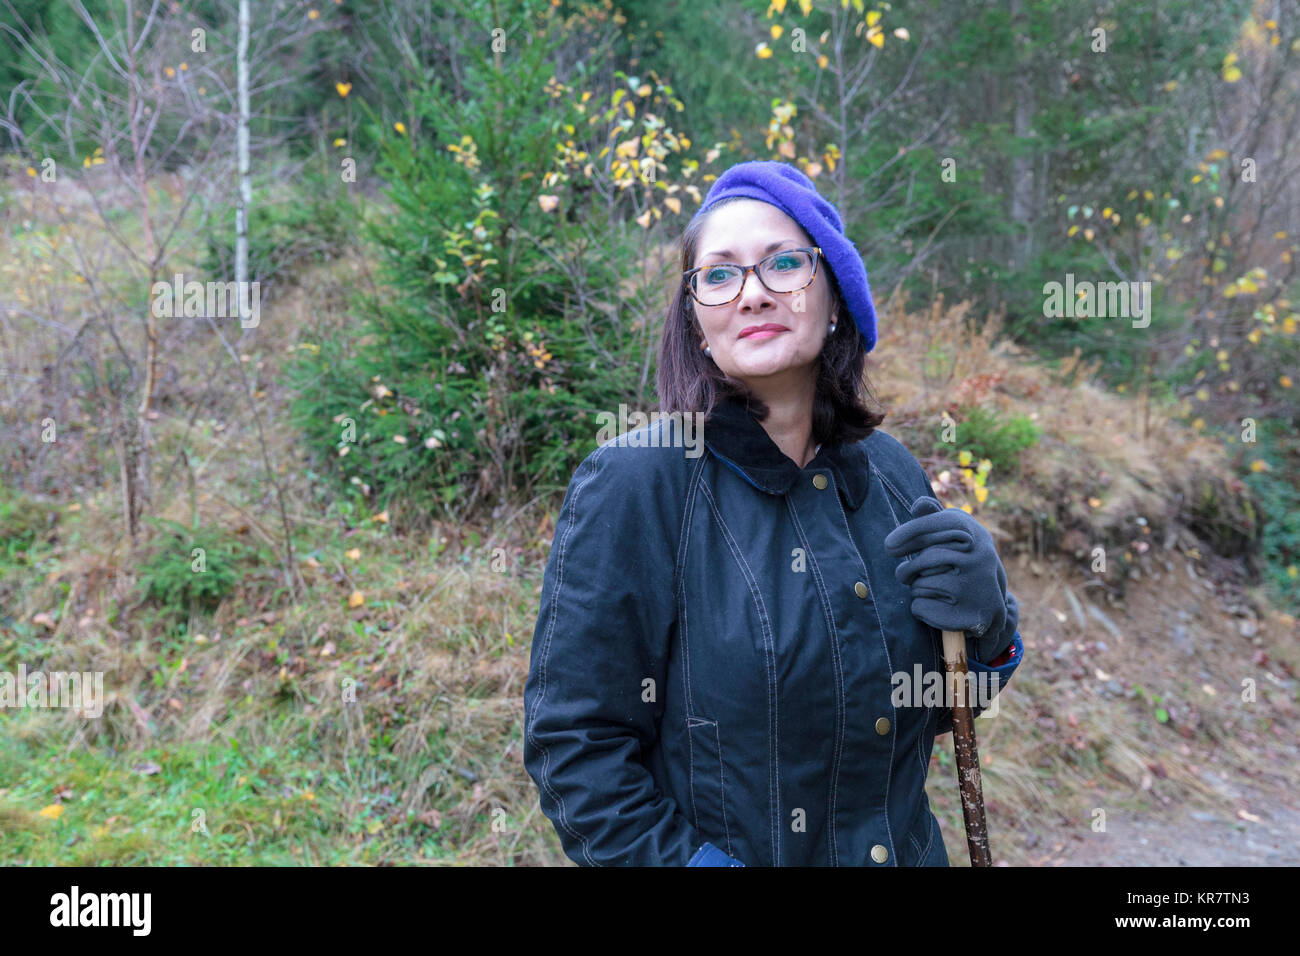 Lady with glasses wearing blue beret standing in the woods Stock Photo